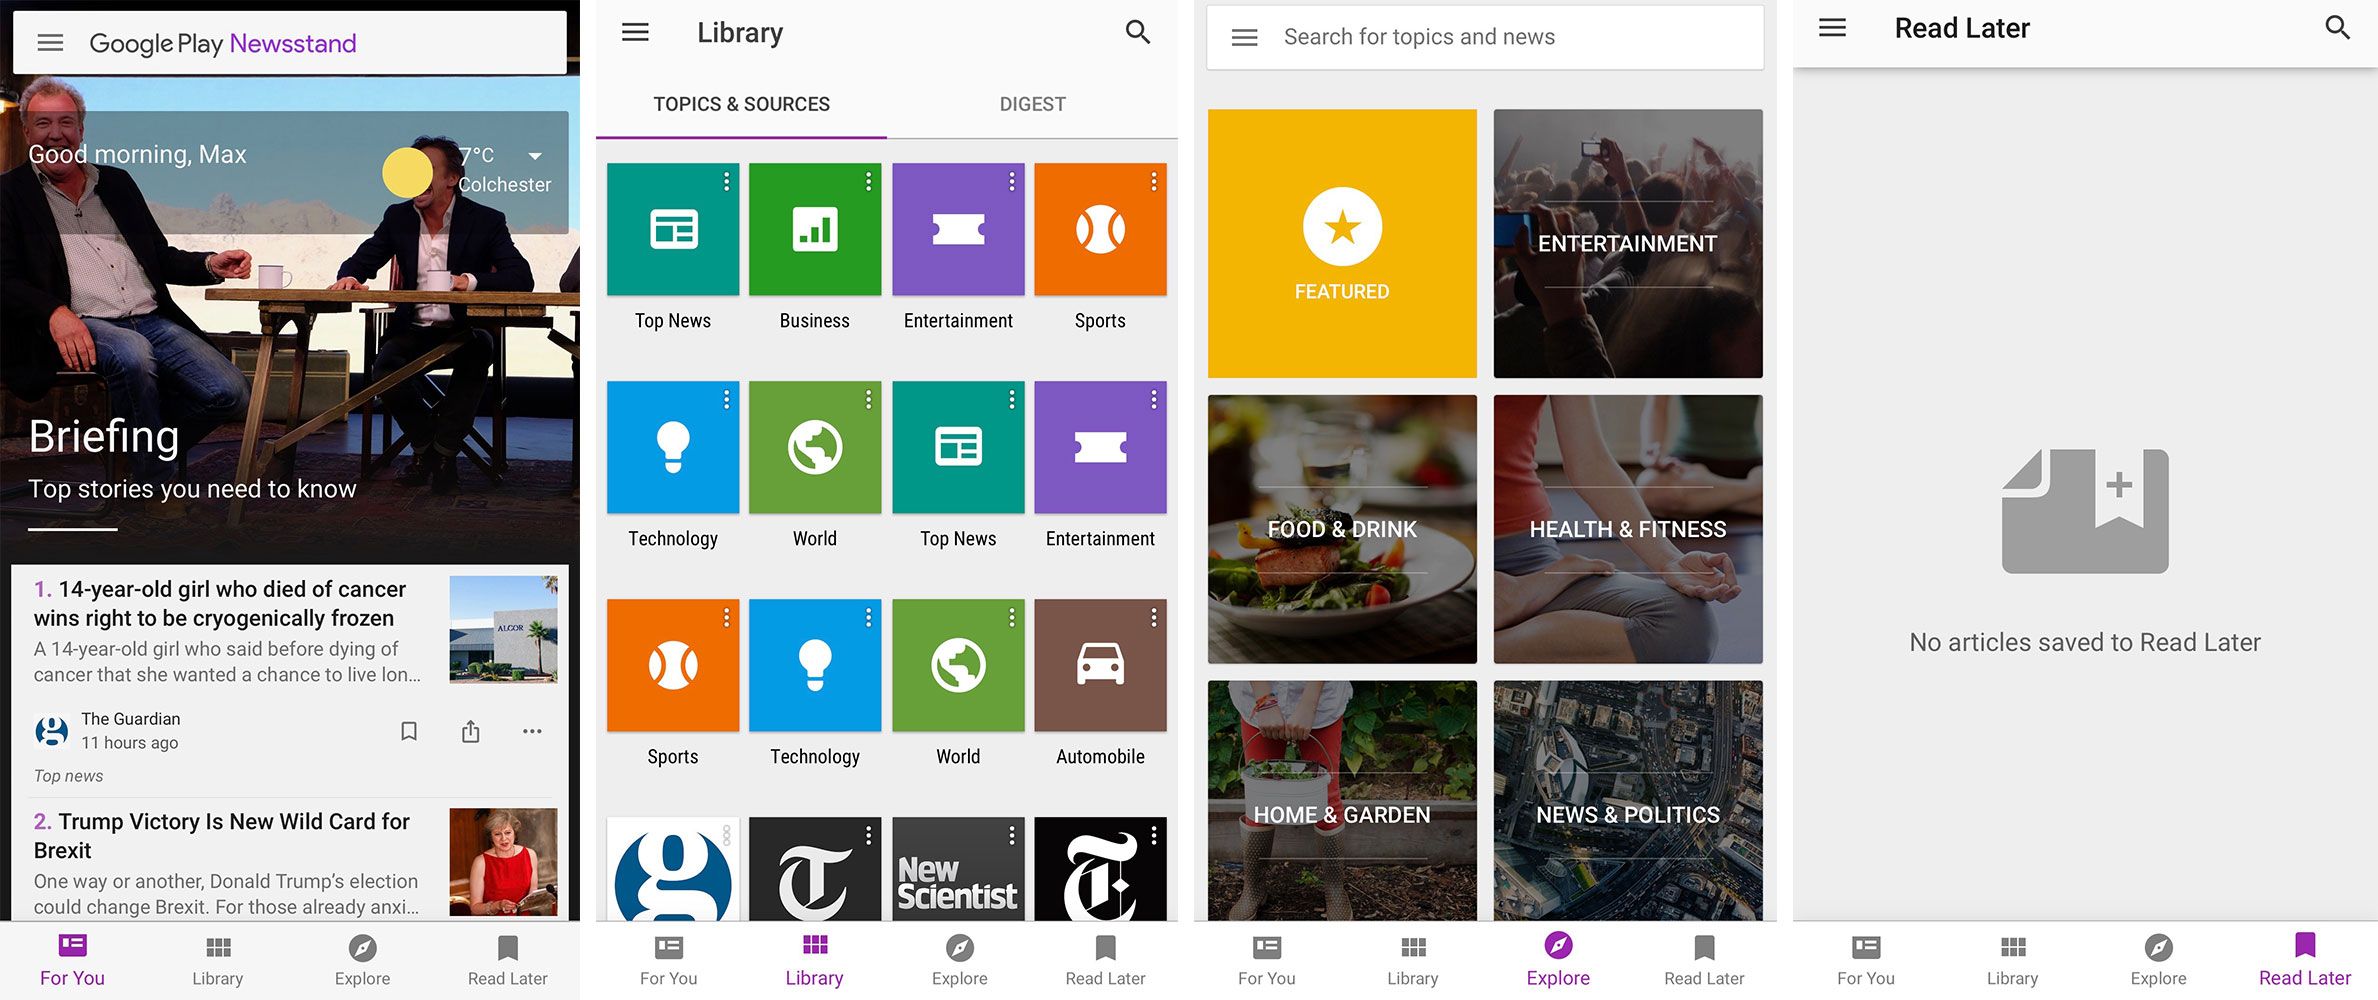 google play newsstand is the latest google app to get a makeover image 1